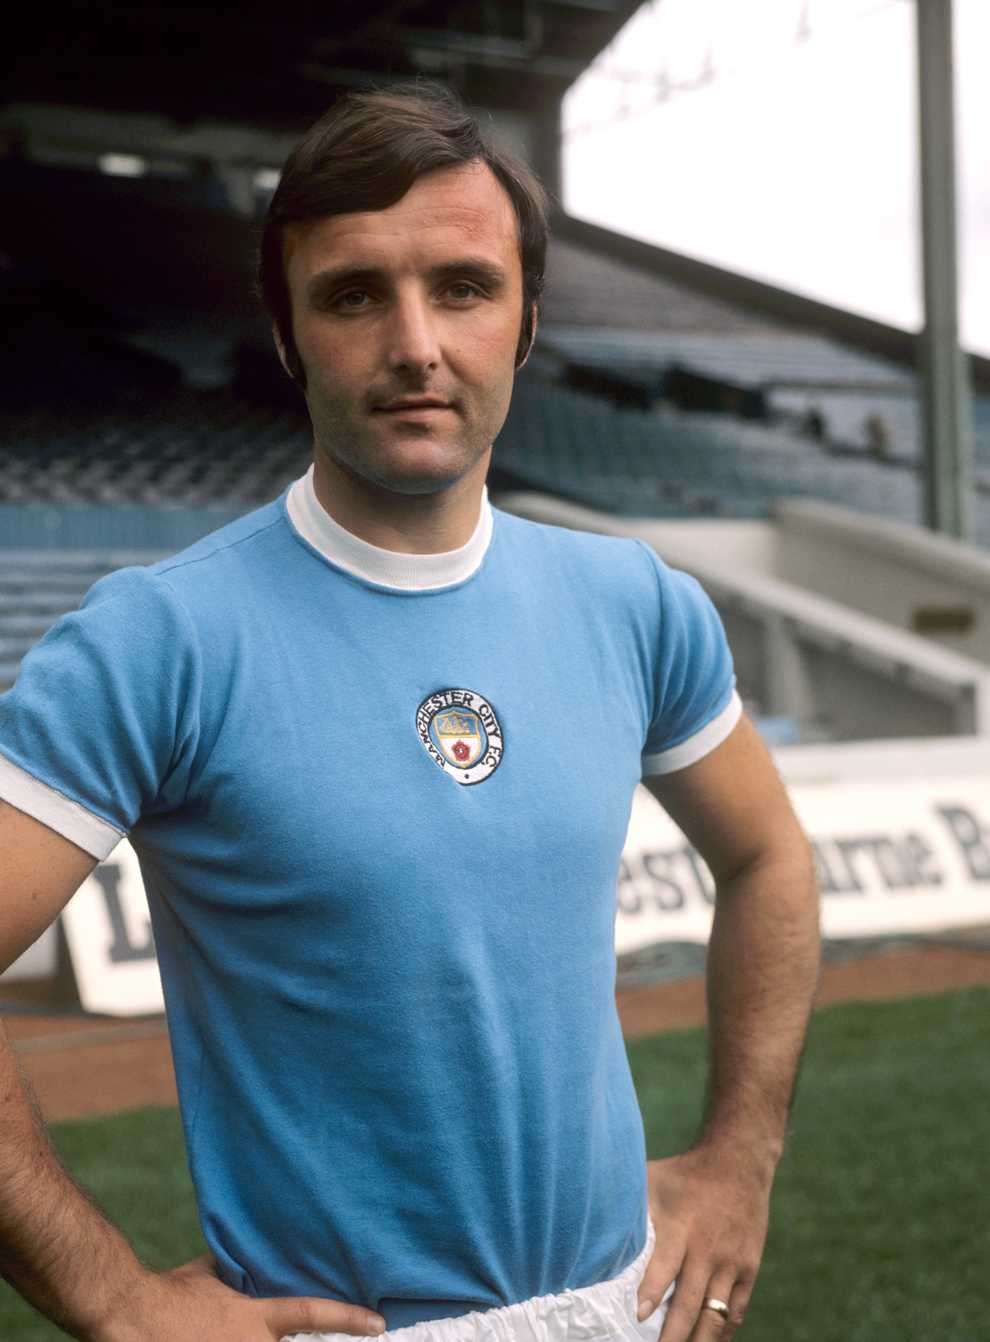 Pardoe spent his whole professional career at Manchester City